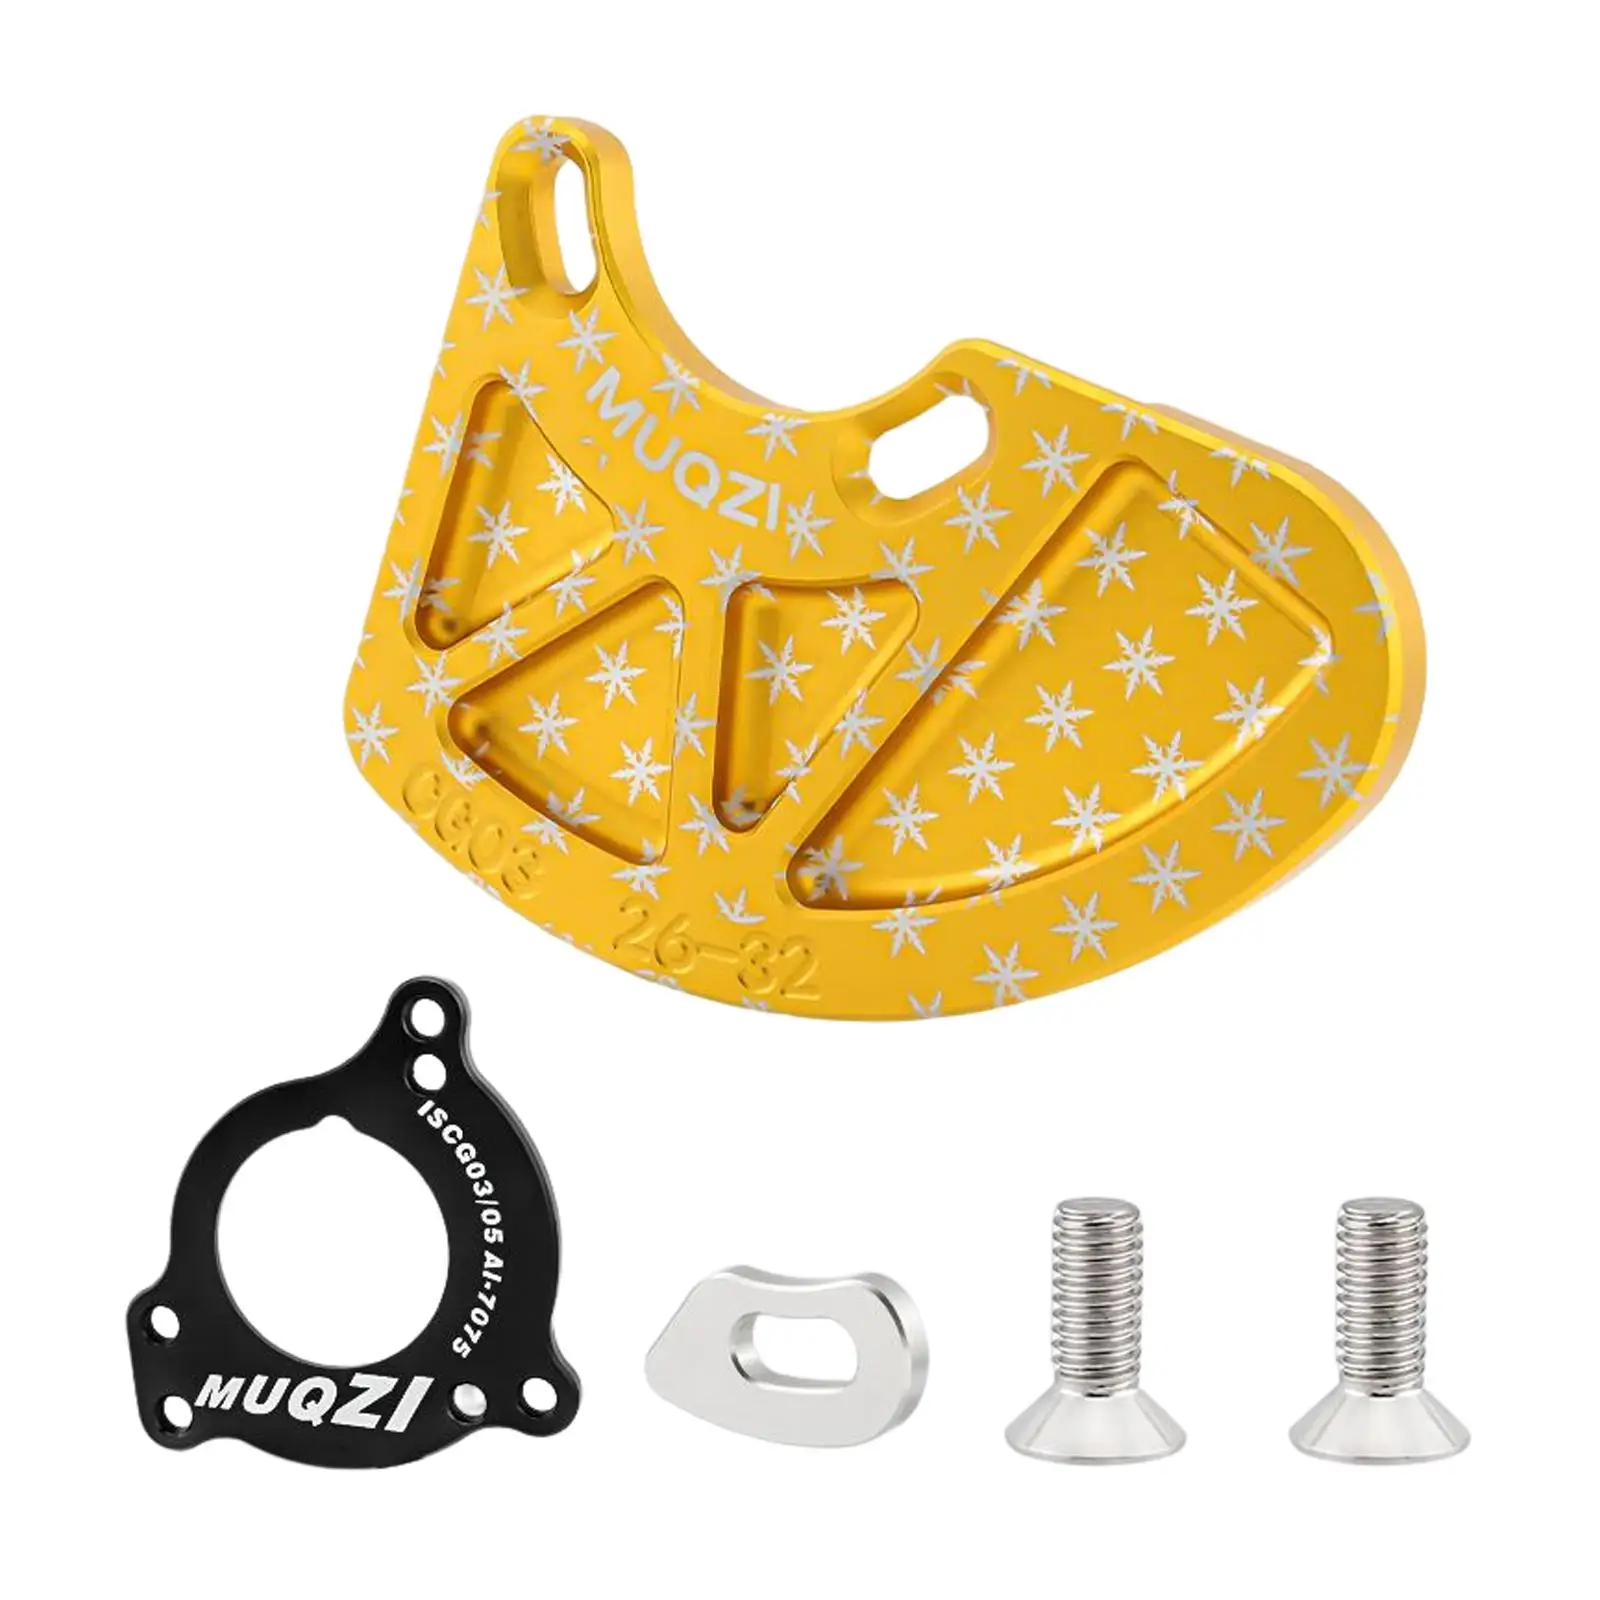 Mountain Bike Chainring Protector Plate Sprocket Protector Crank Sprocket Protection Fittings for Iscg05